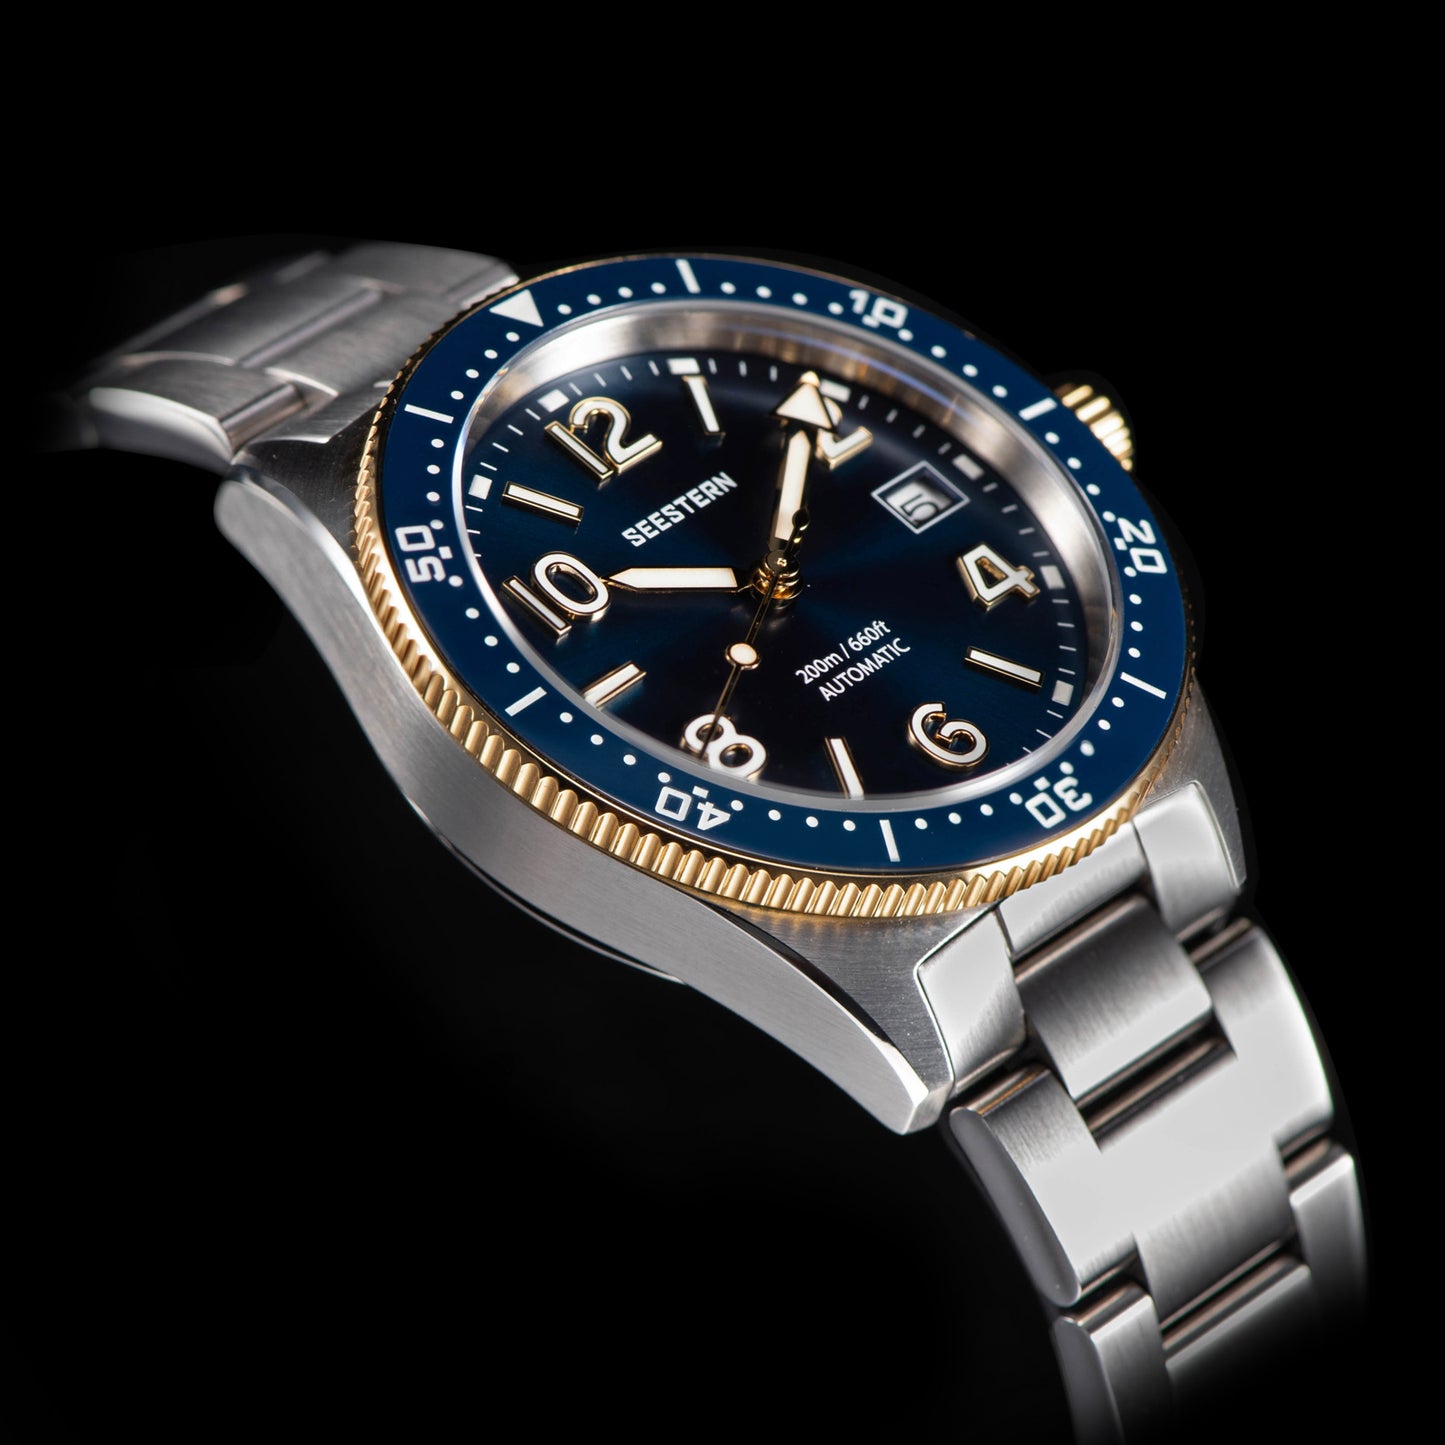 Seestern 434 Professional Diver Automatic 200m Water Resistant V2 (Bigger Watch Crown, Engrave Case Back)